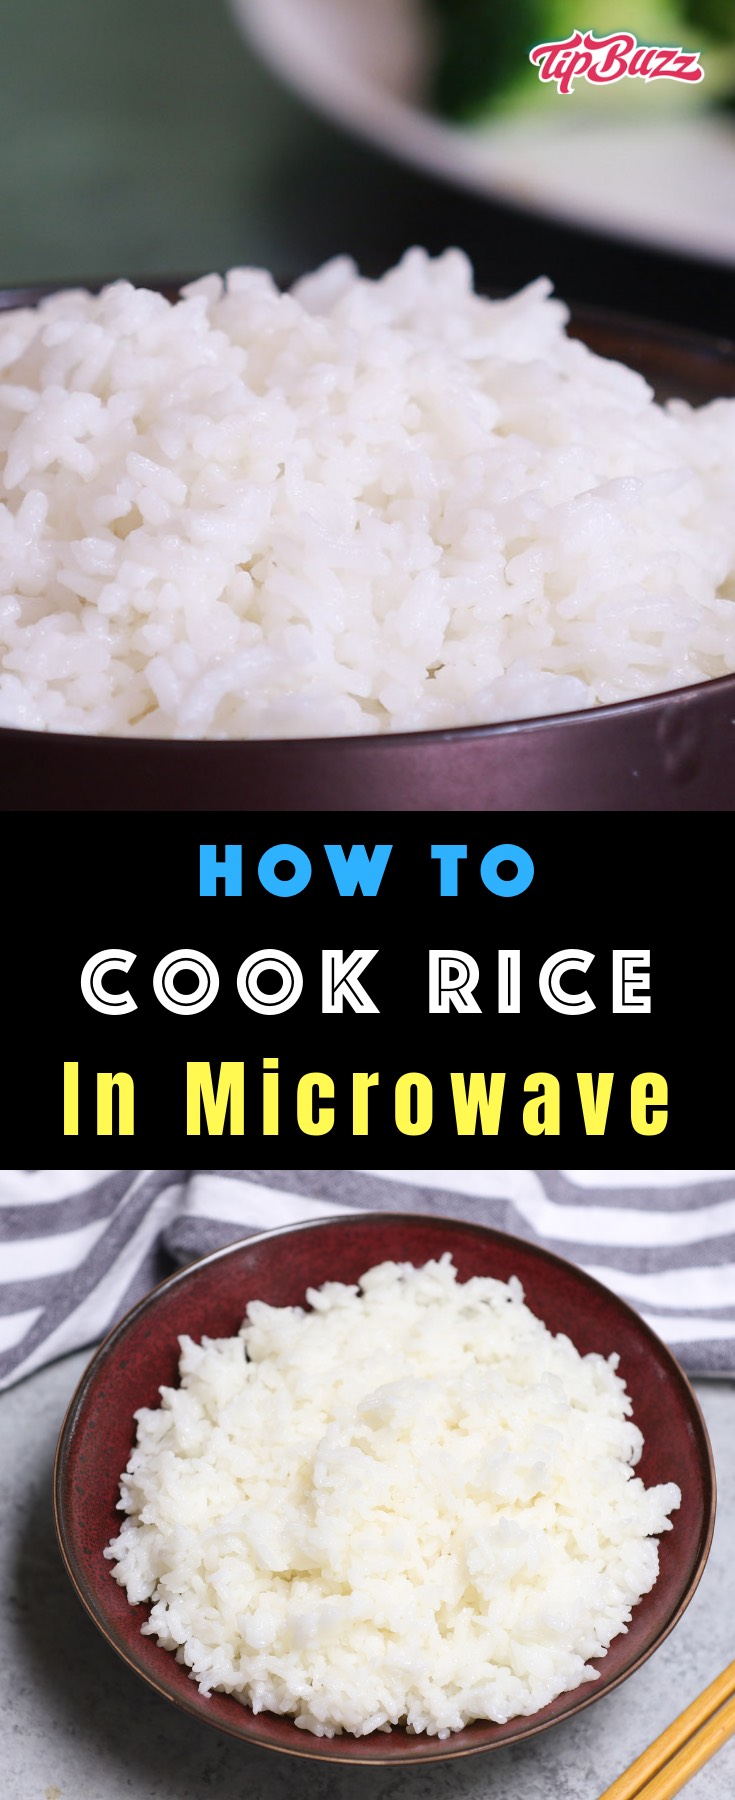 Learn How to Cook Rice in the Microwave – easier, faster and perfectly cooked each time. Rice cooked in the microwave is fluffy and tender, tasting the same, if not better than a rice cooker or stovetop.